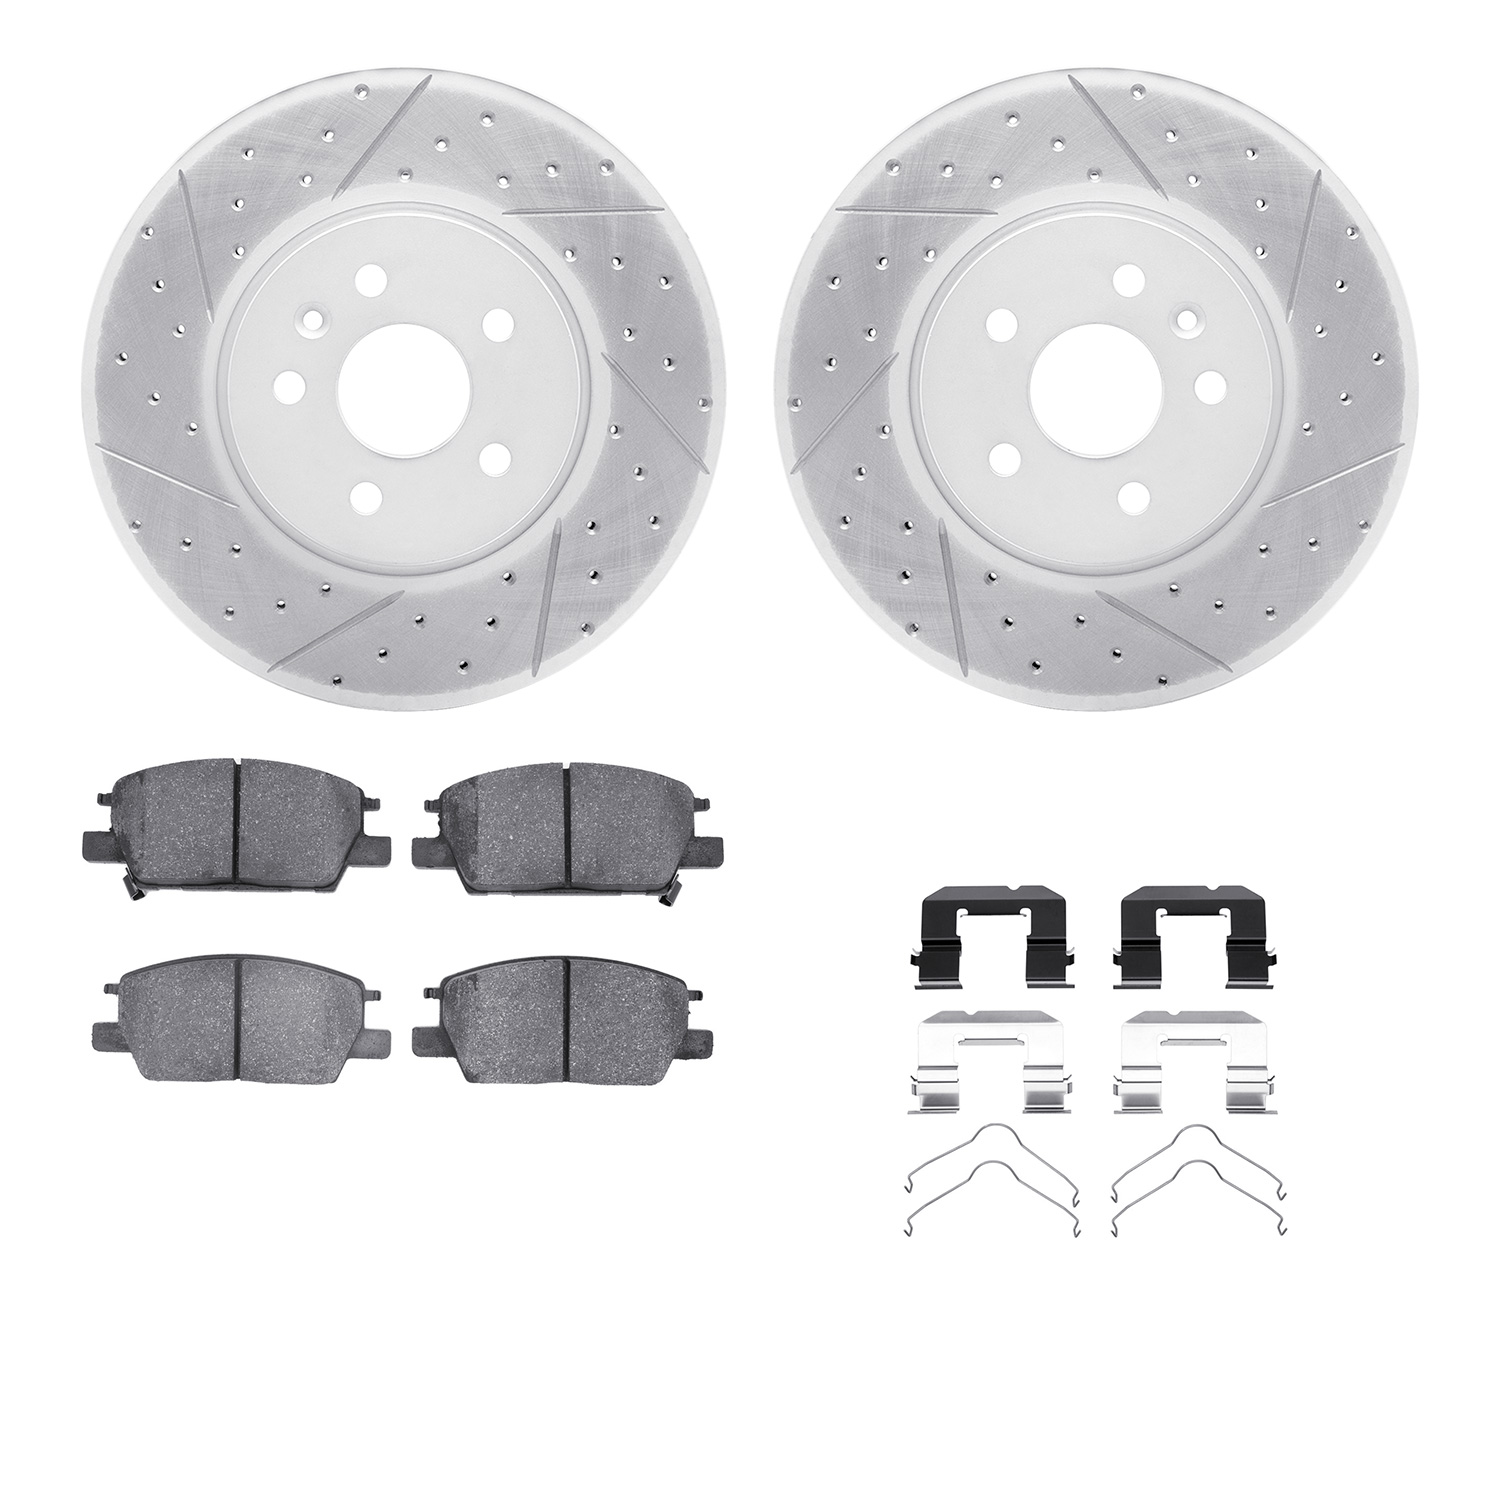 2512-45032 Geoperformance Drilled/Slotted Rotors w/5000 Advanced Brake Pads Kit & Hardware, Fits Select GM, Position: Front